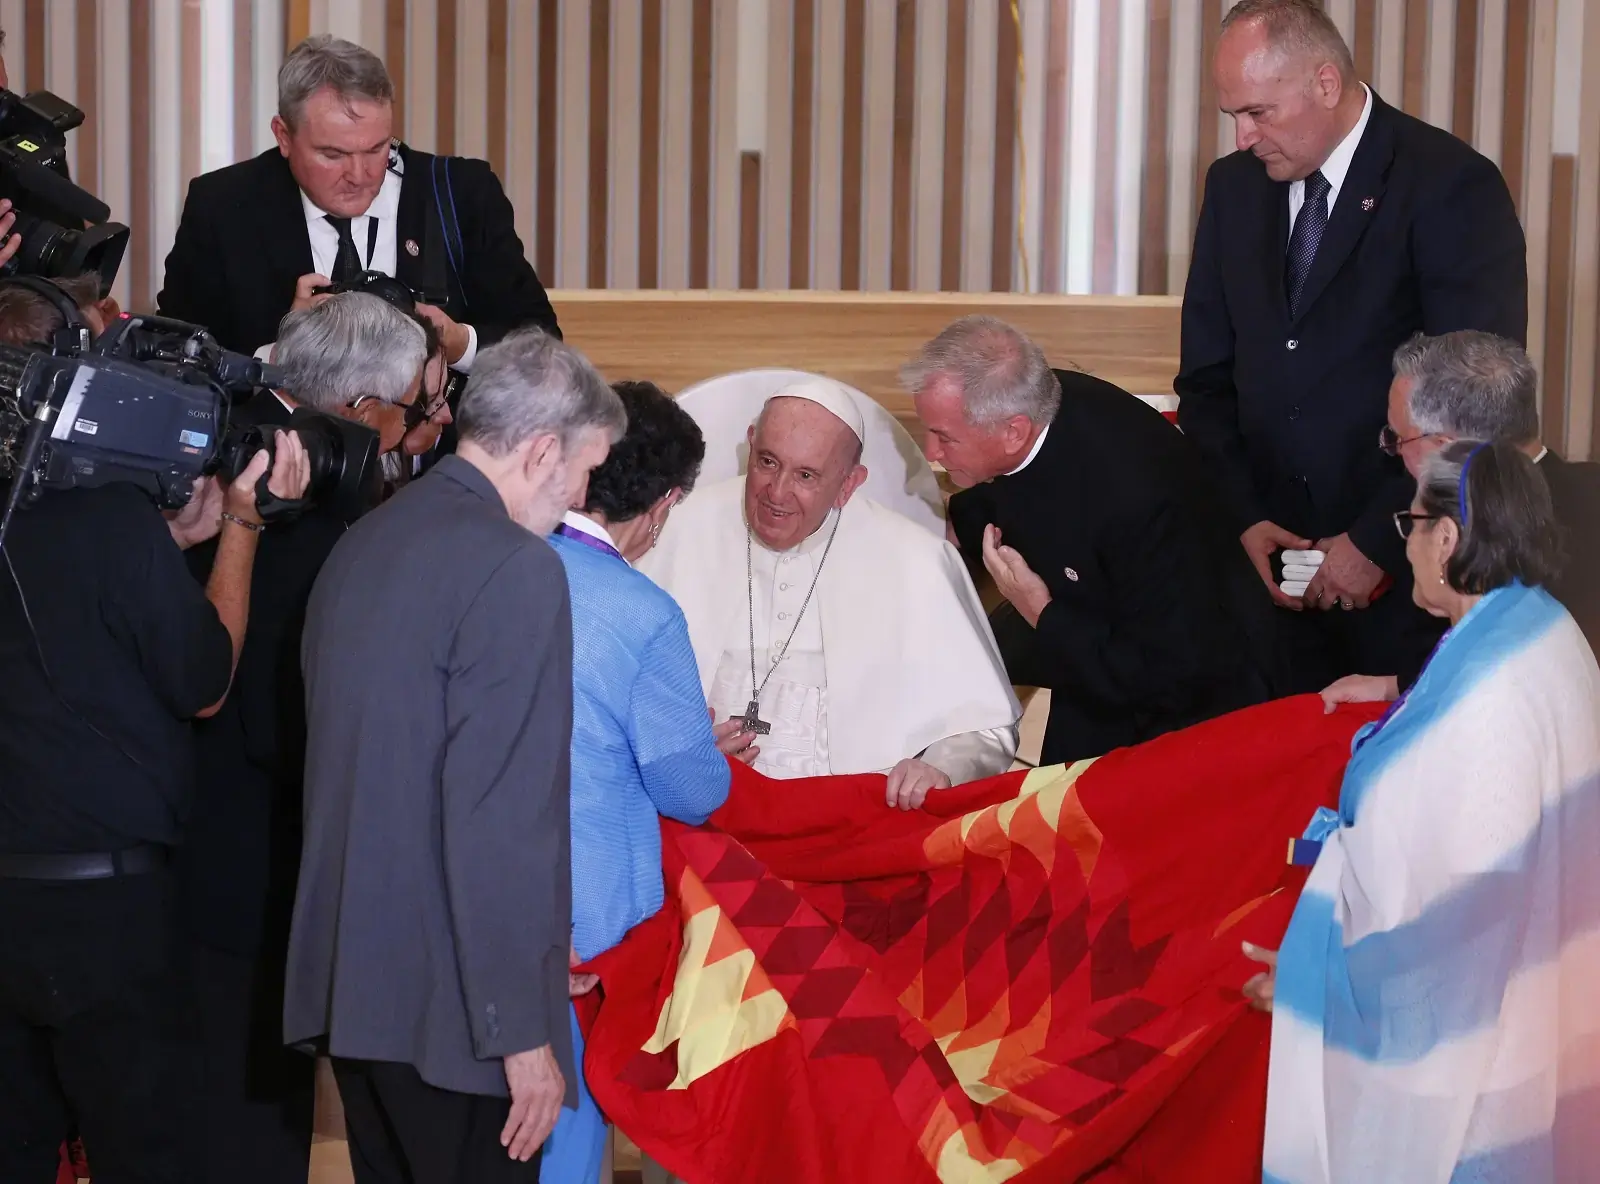 Pope Francis receives a Star Blanket during a meeting with Indigenous peoples and members of the parish community of Sacred Heart Church of the First Peoples in Edmonton, Alberta